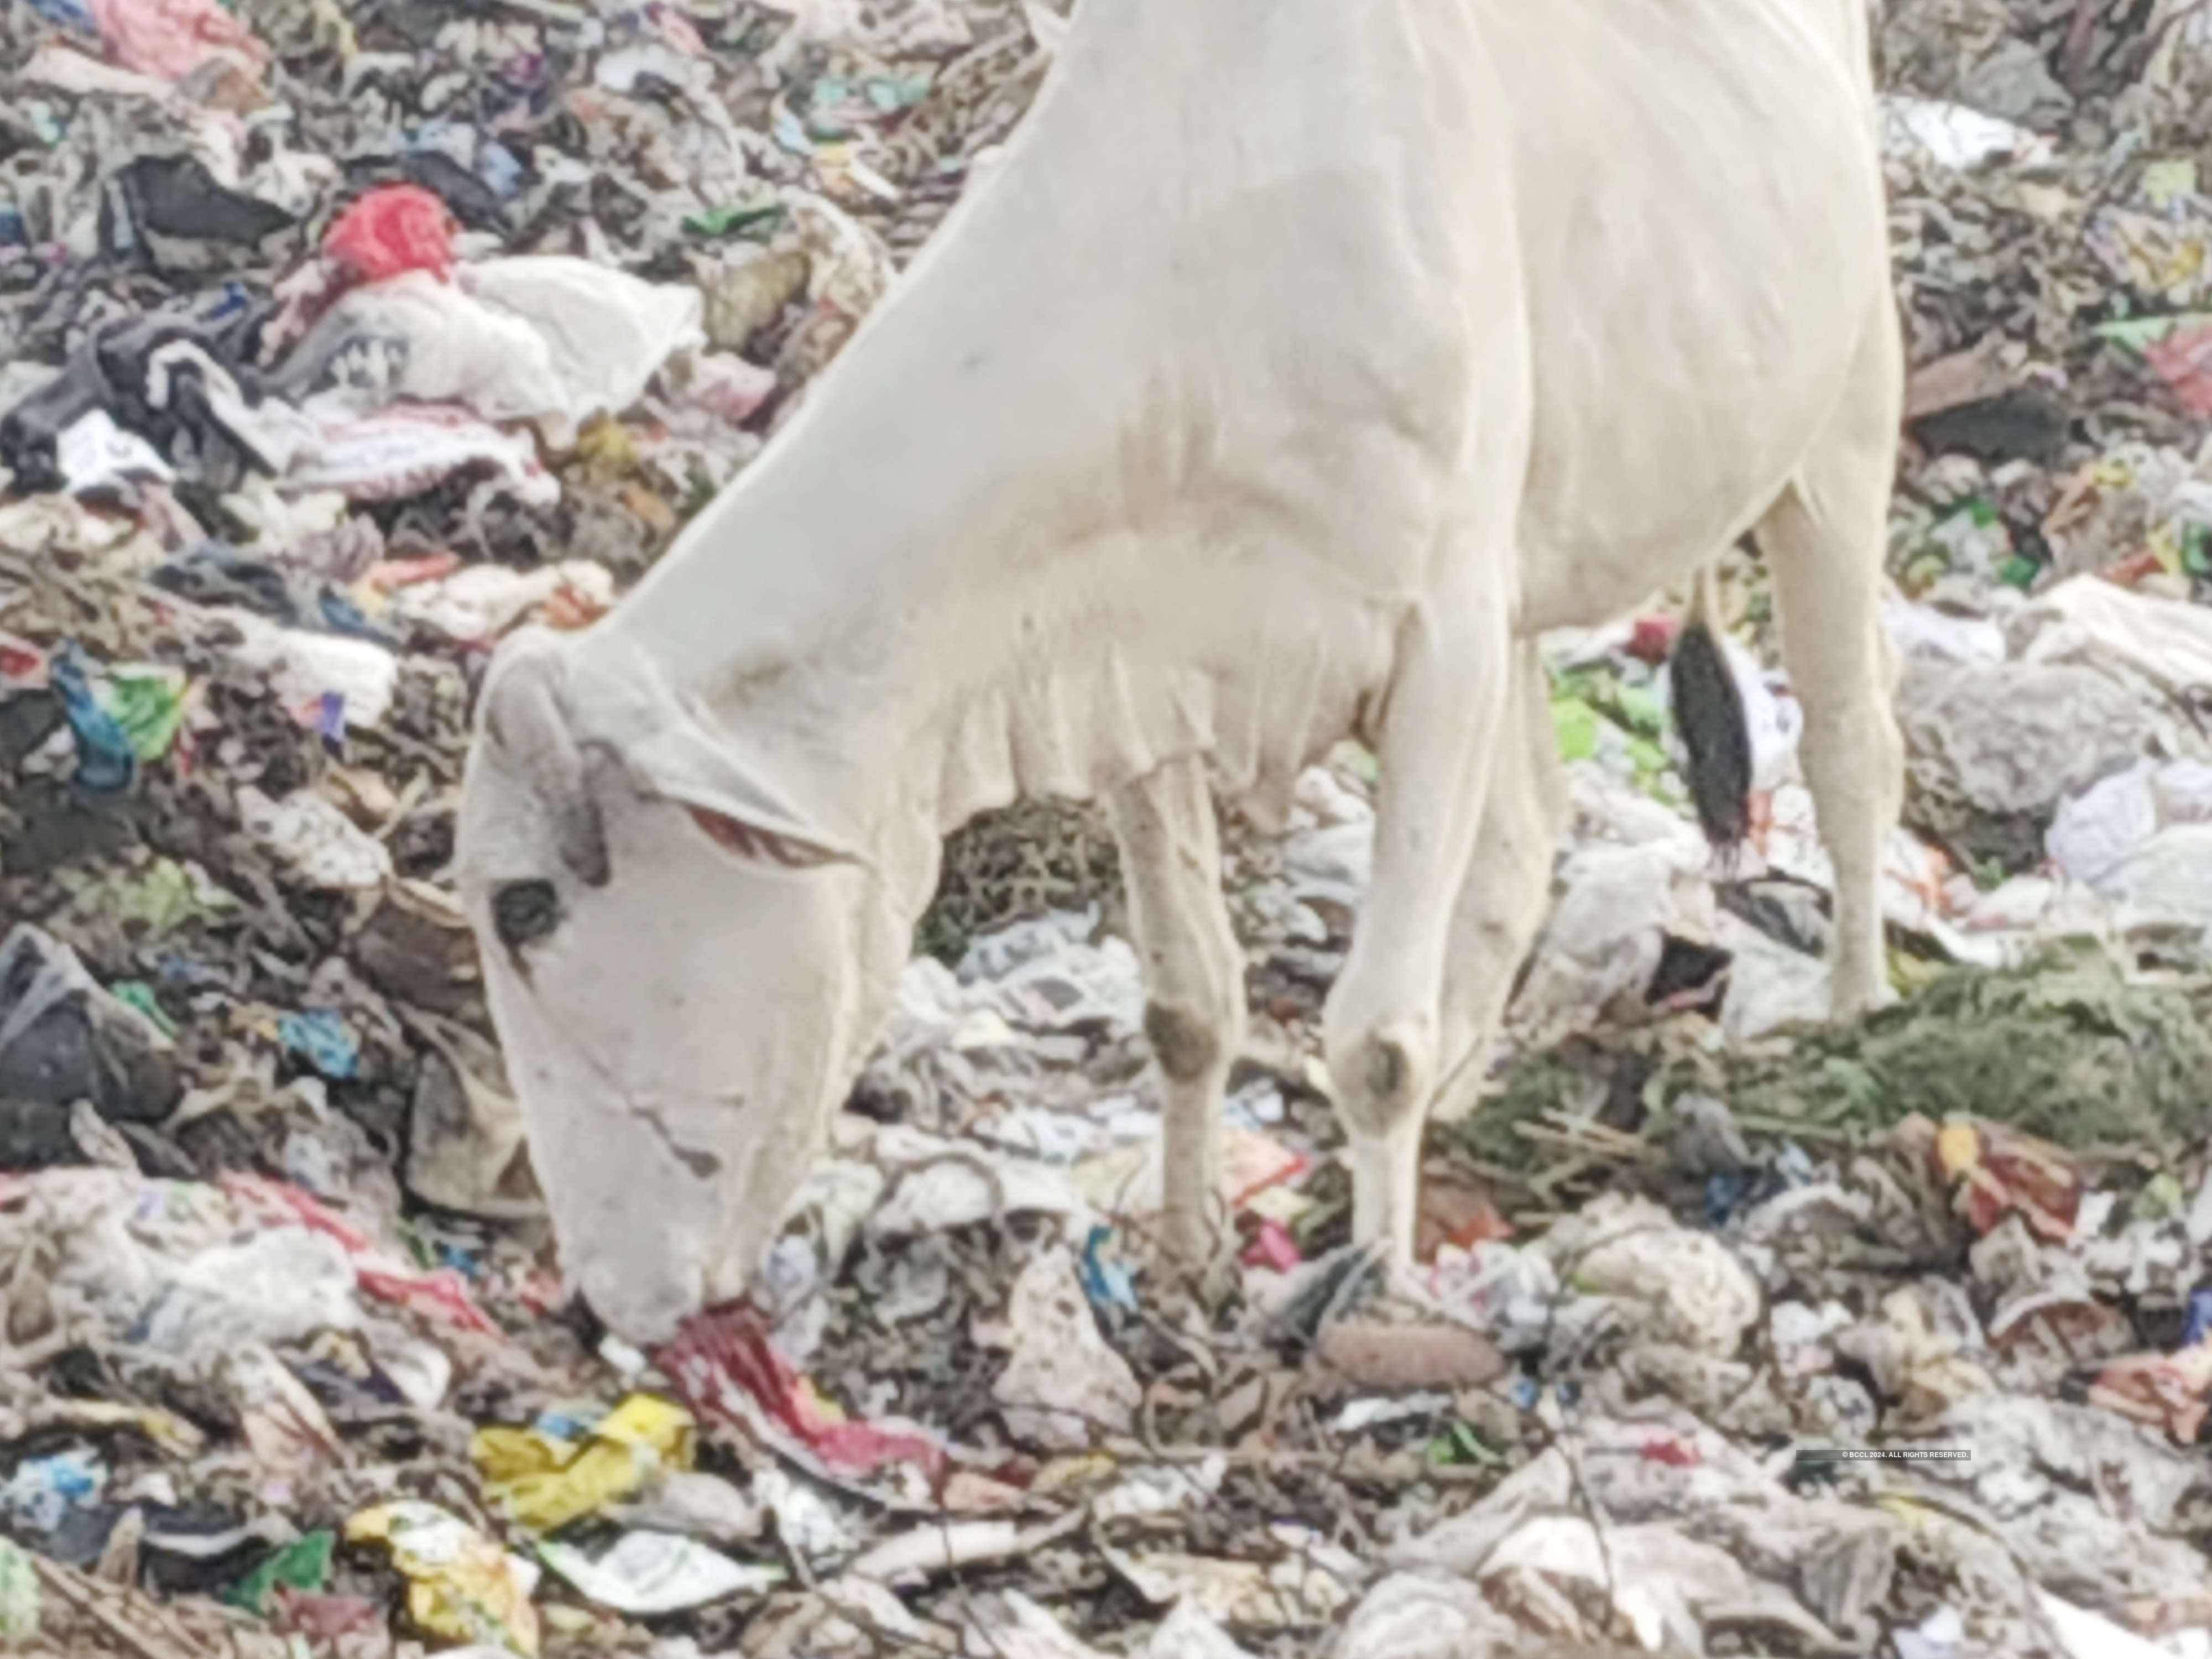 Holy cows graze on coronavirus-related medical waste